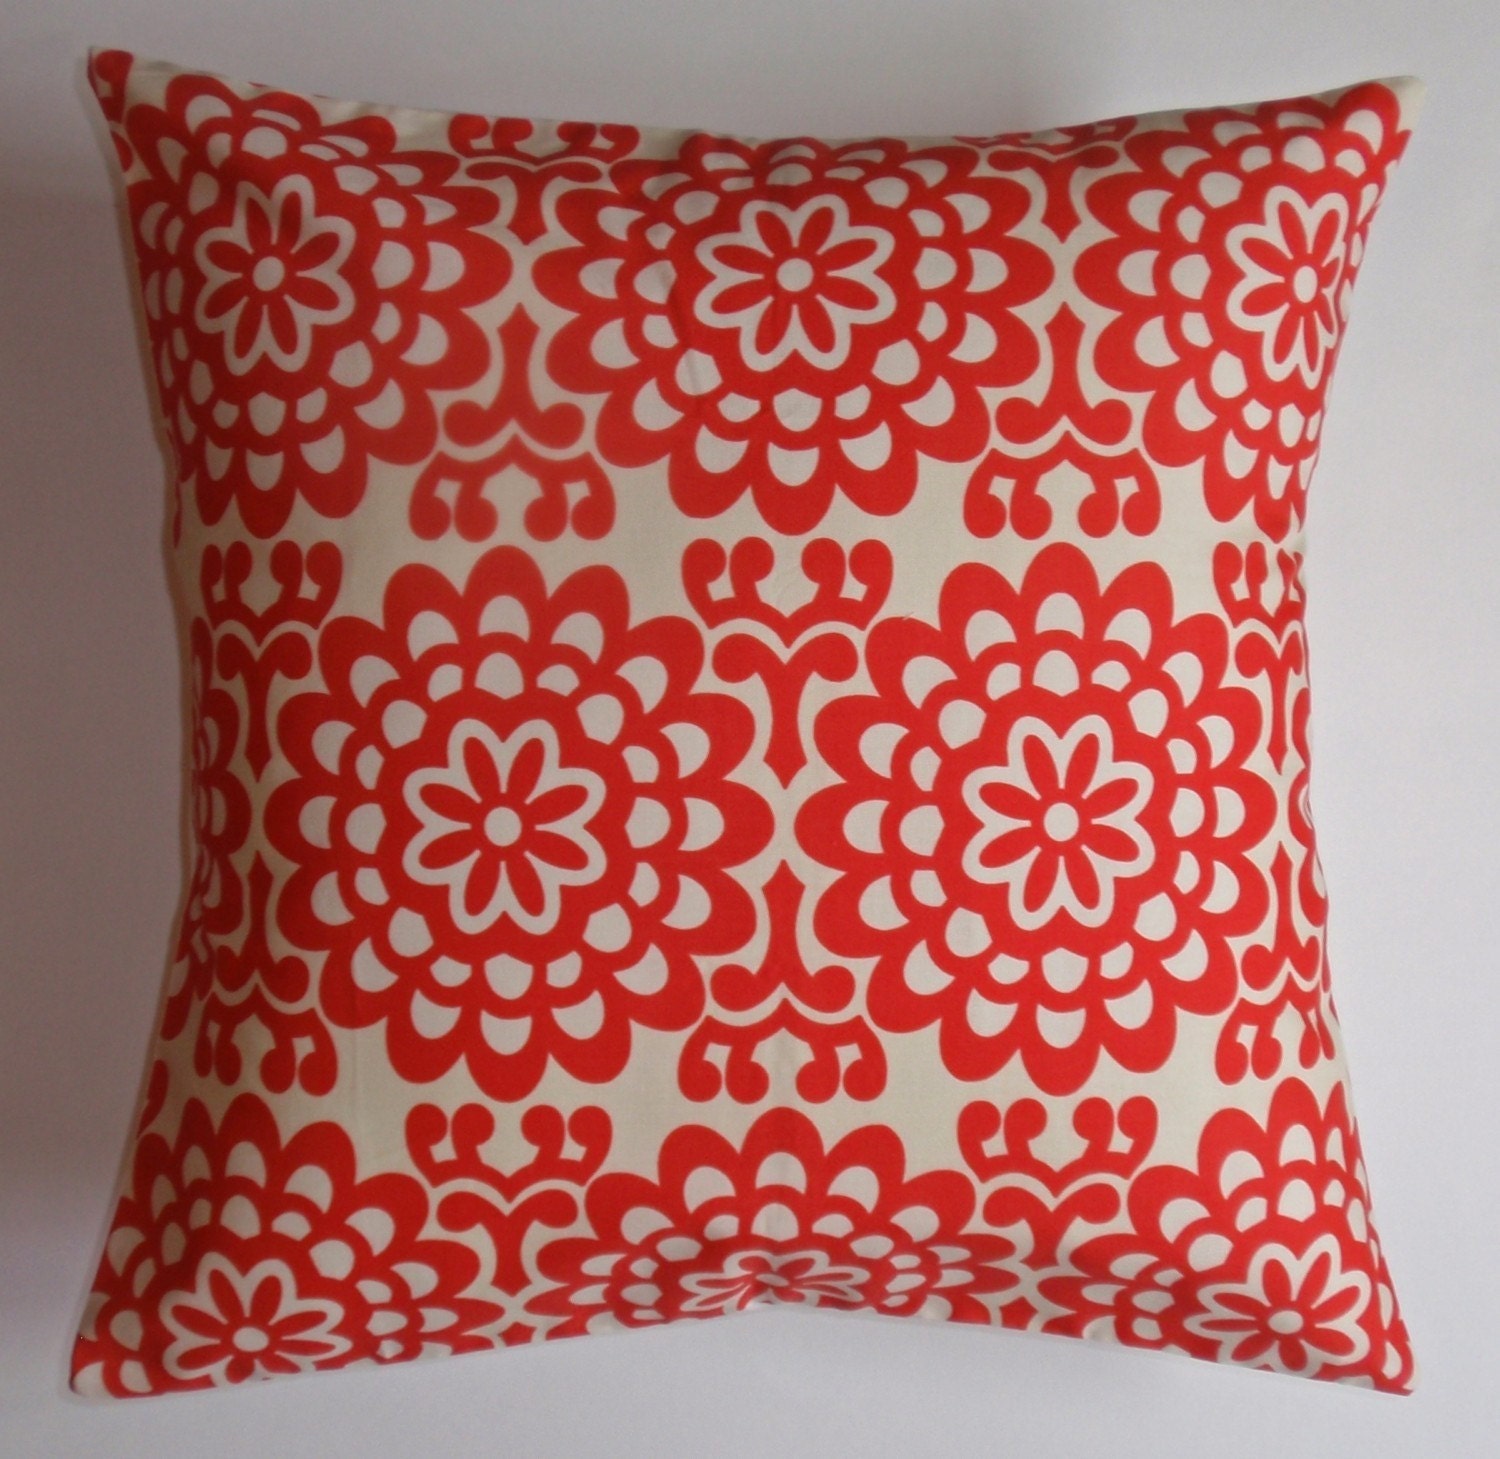 Throw Pillow 16X16 Removable cover sewn with Amy Butler's Wallflower Cherry Red fabric